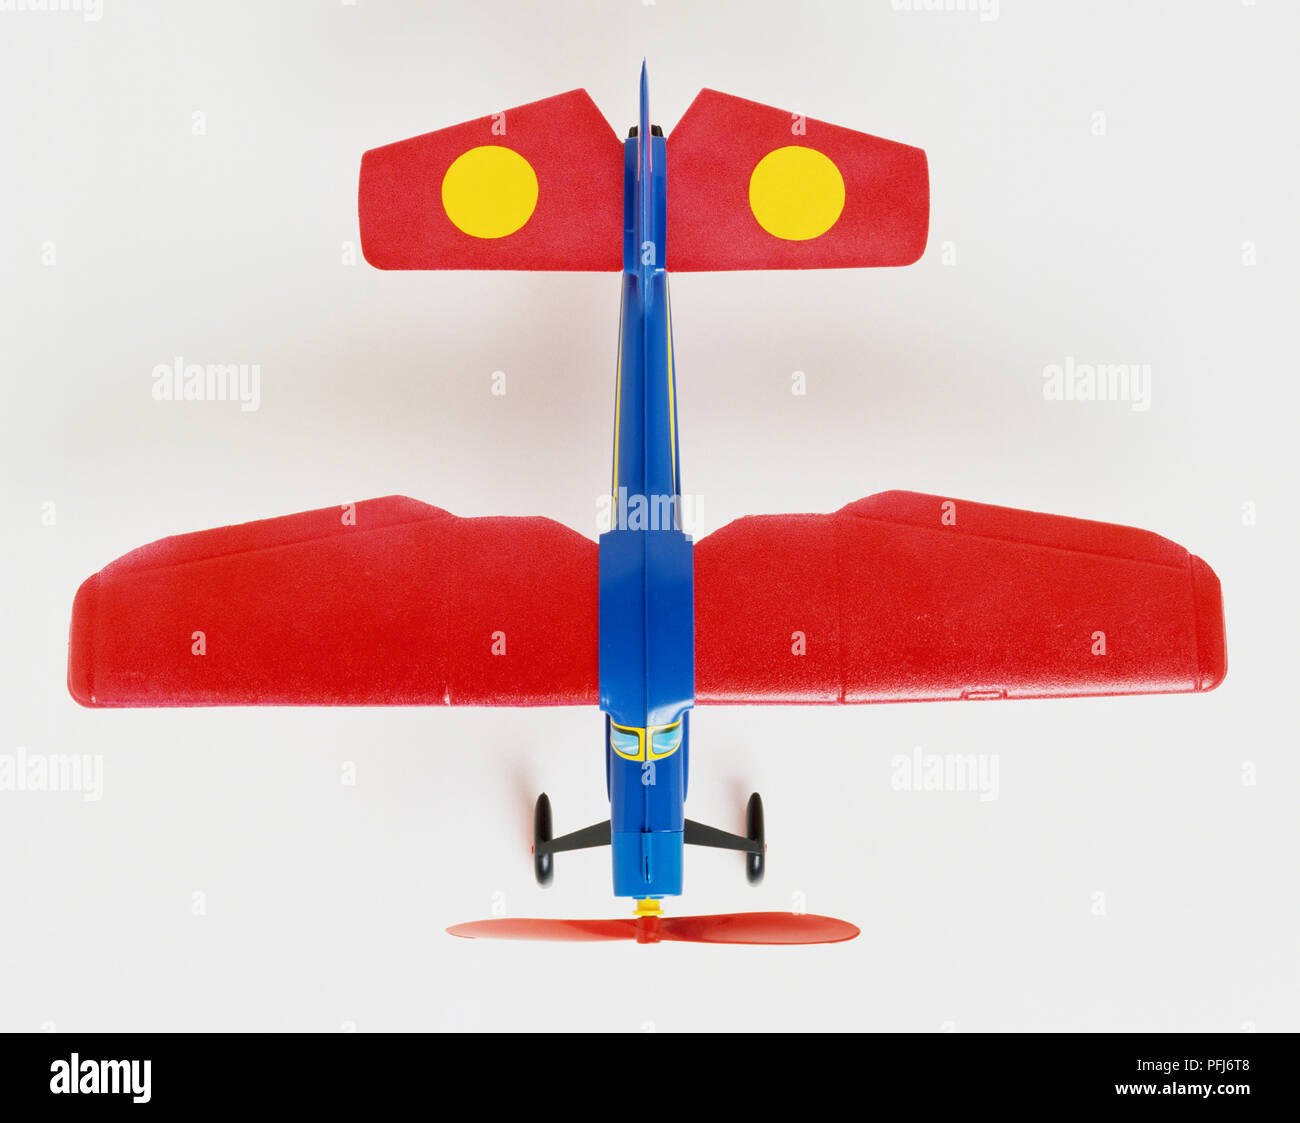 Colourful toy propeller plane, red wings blue body, yellow dots on tail wings, overhead view. Stock Photo